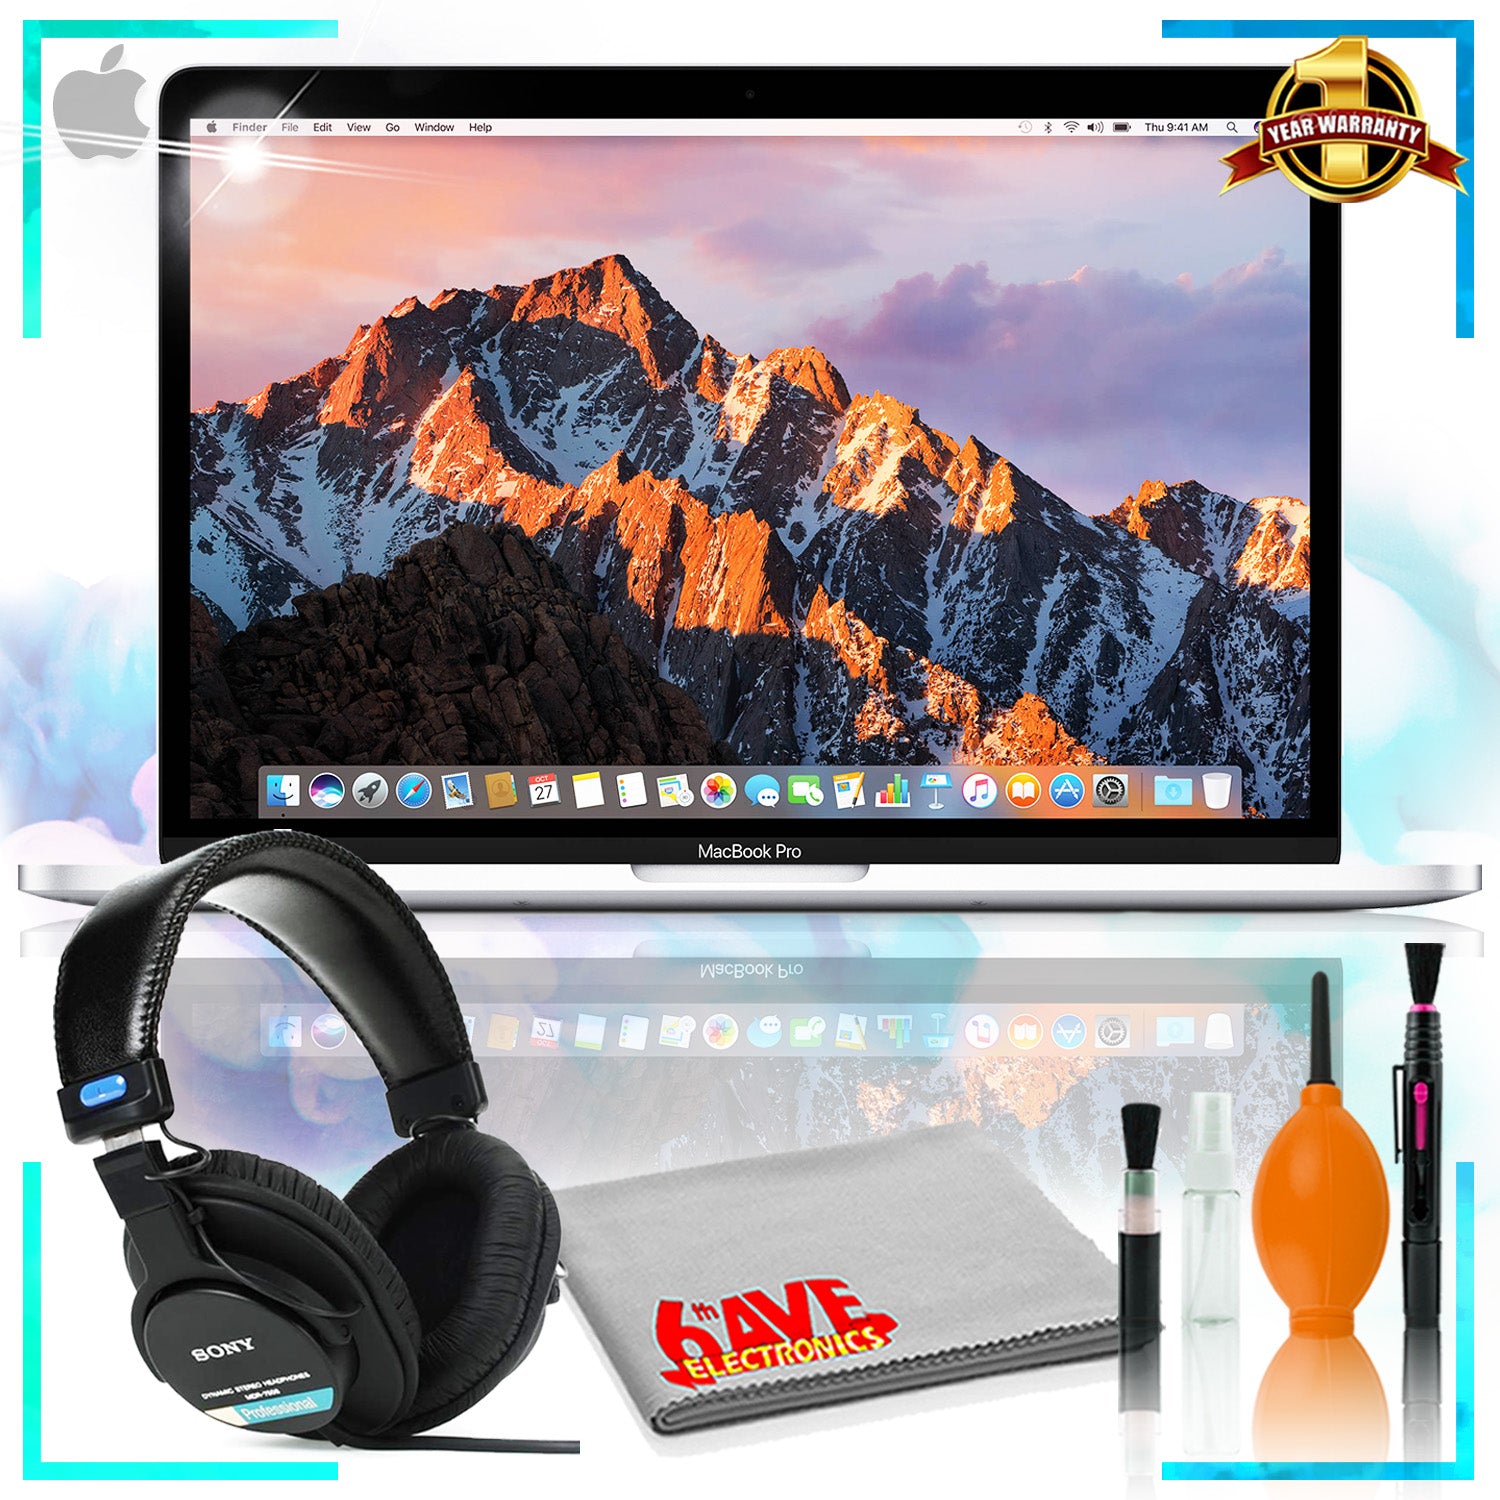 13-inch MacBook Pro with Touch Bar: dual-core i5 512GB - Silver + Sony MDR-7506 Stereo Headphones + Maintanence Kit